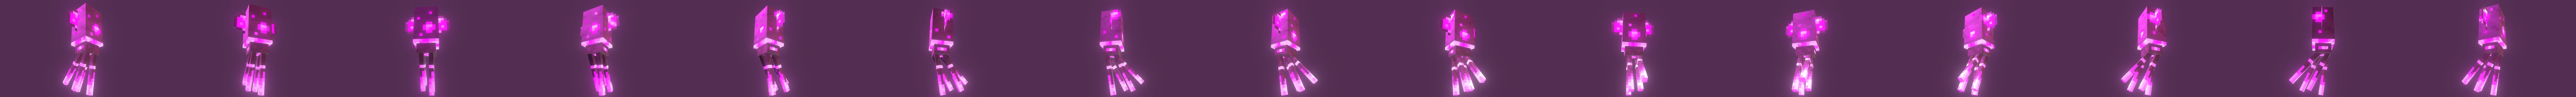 Ender Squid - Fanmade Minecraft Mob - Download Free 3D model by